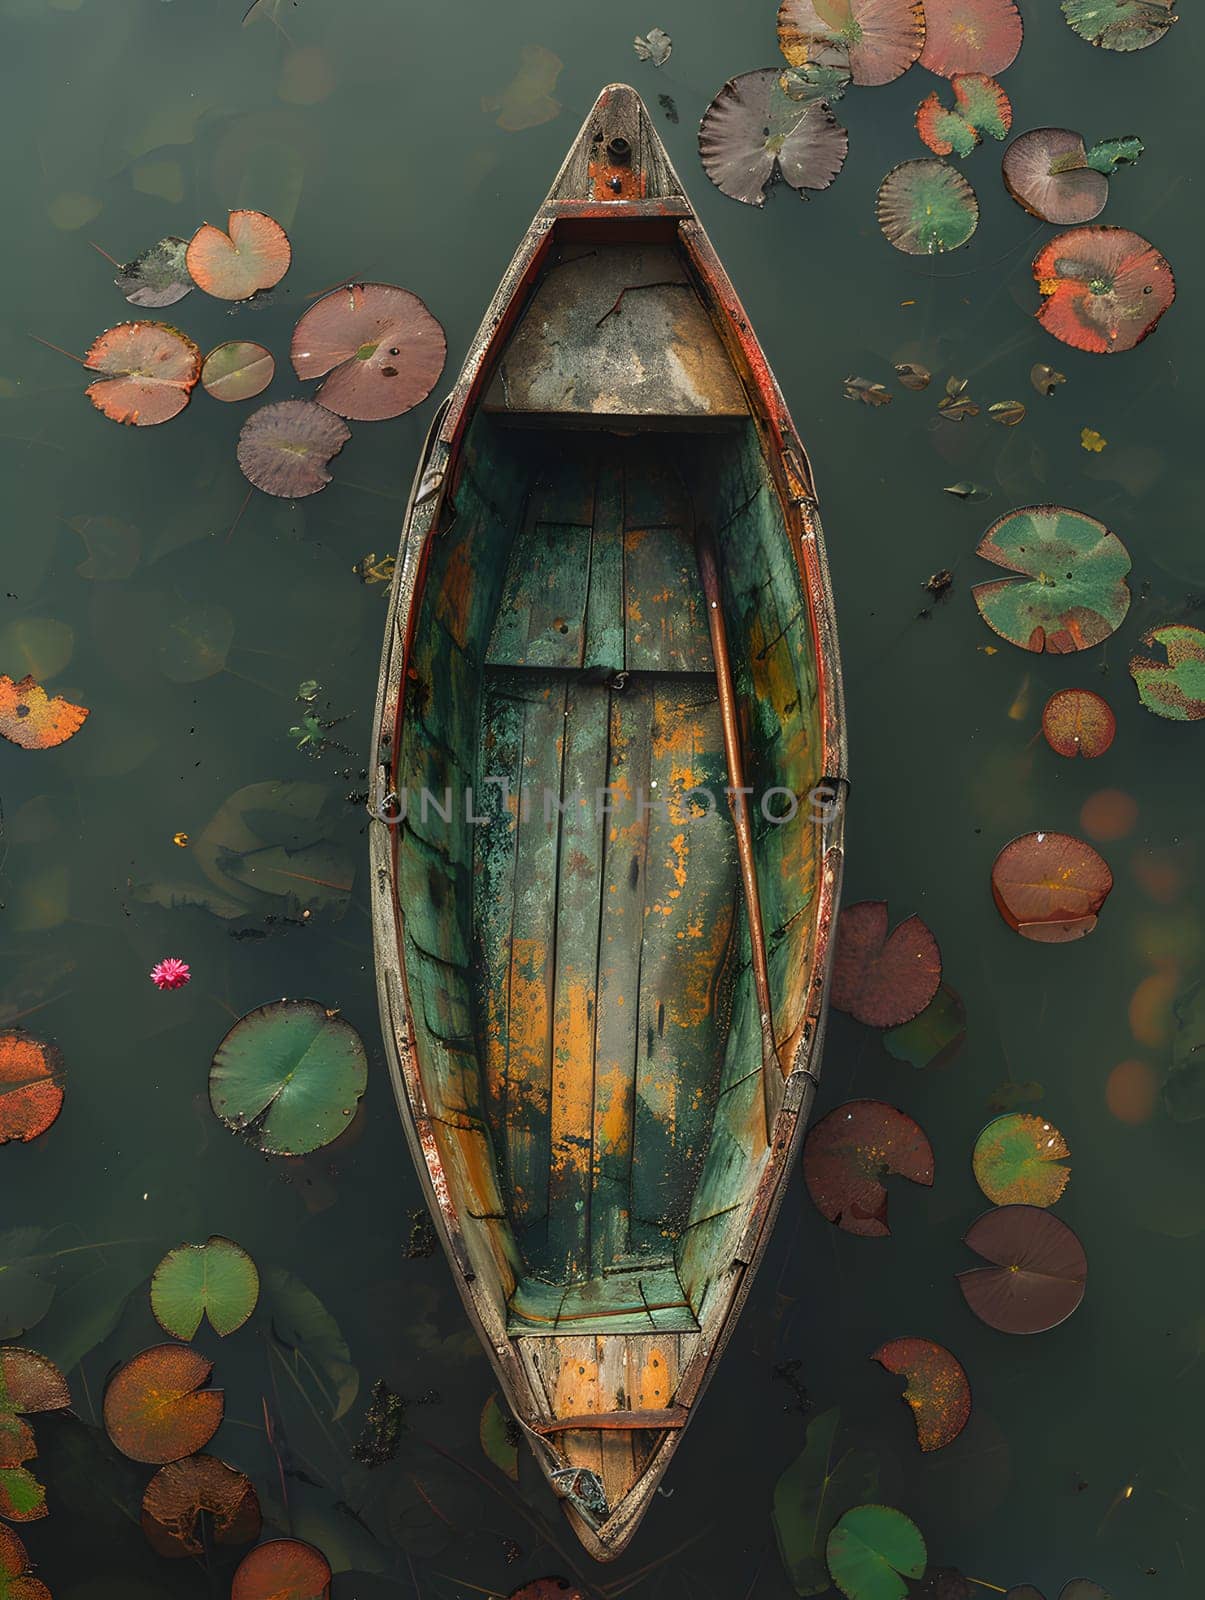 An elegant painting of a wooden boat surrounded by water lilies, featuring intricate patterns and oval shapes, resembling a beautiful piece of body jewelry or ornament